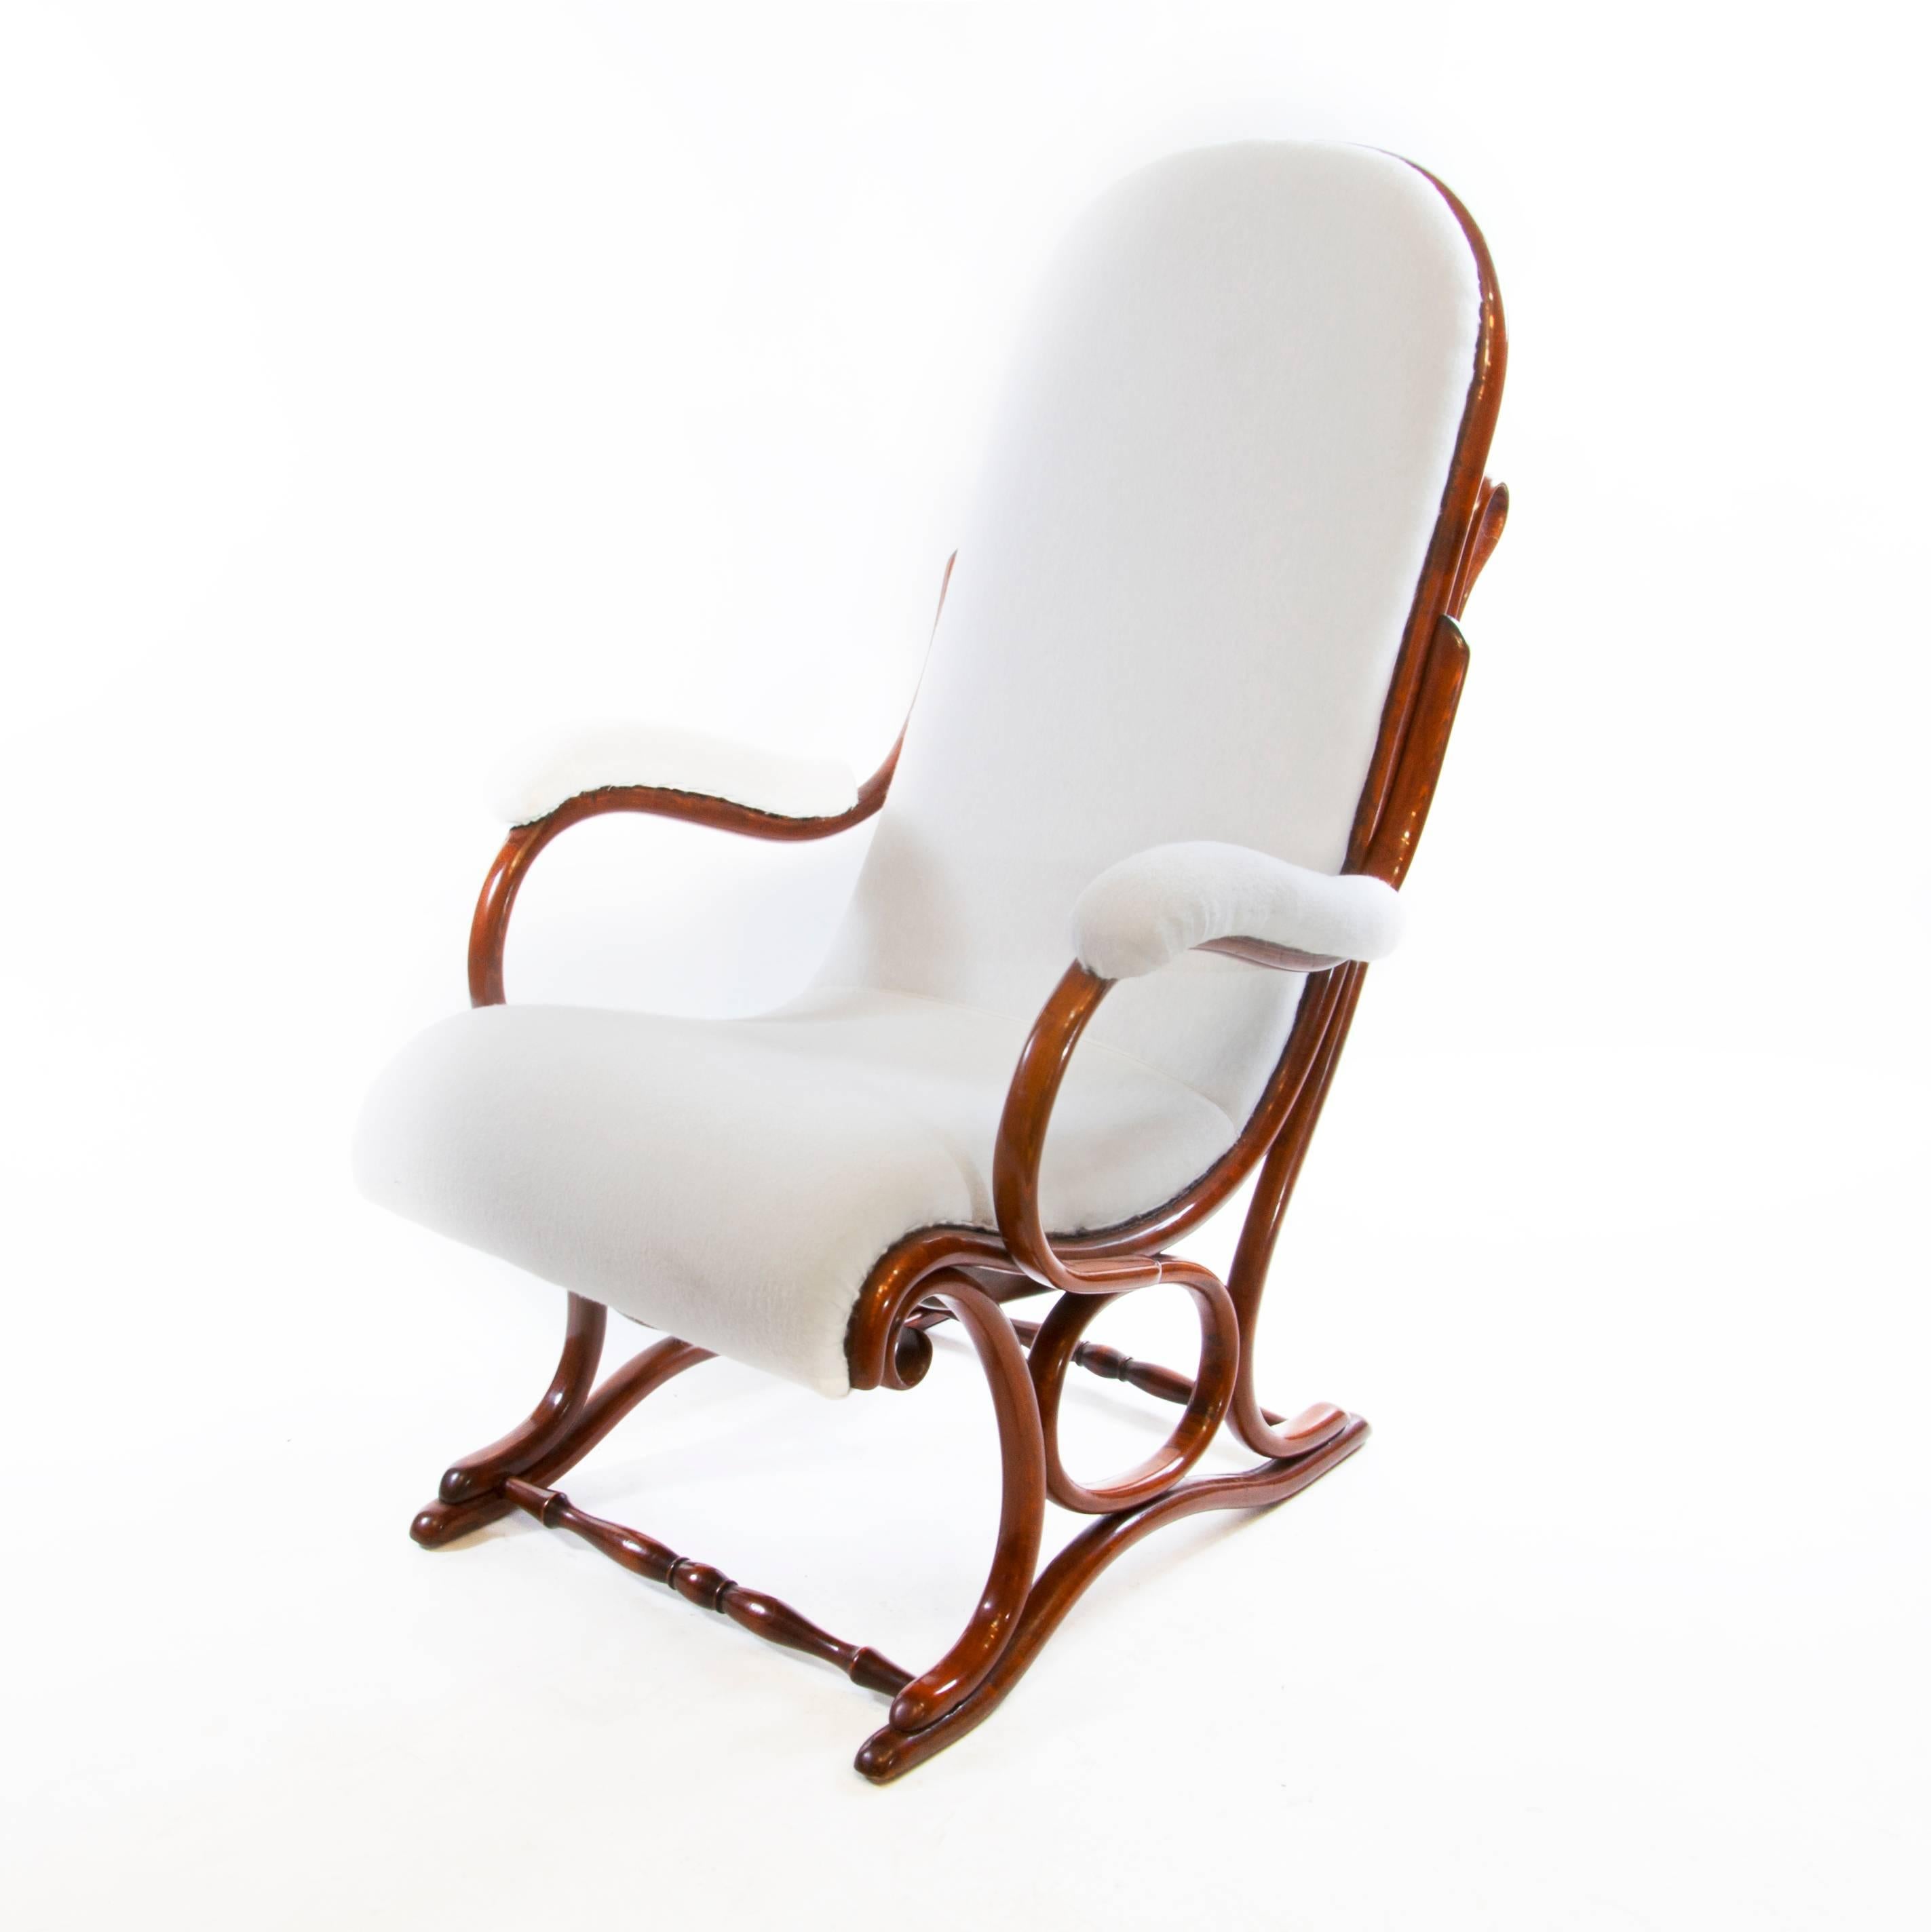 Antique Thonet bentwood armchair Salonfauteuil No. 1 designed by the Gebruder Thonet, circa 1900, manufactured between 1905-1920.
A very rare and antique Thonet upholstered armchair.
The company Thonet was founded by Michael Thonet and was greatly